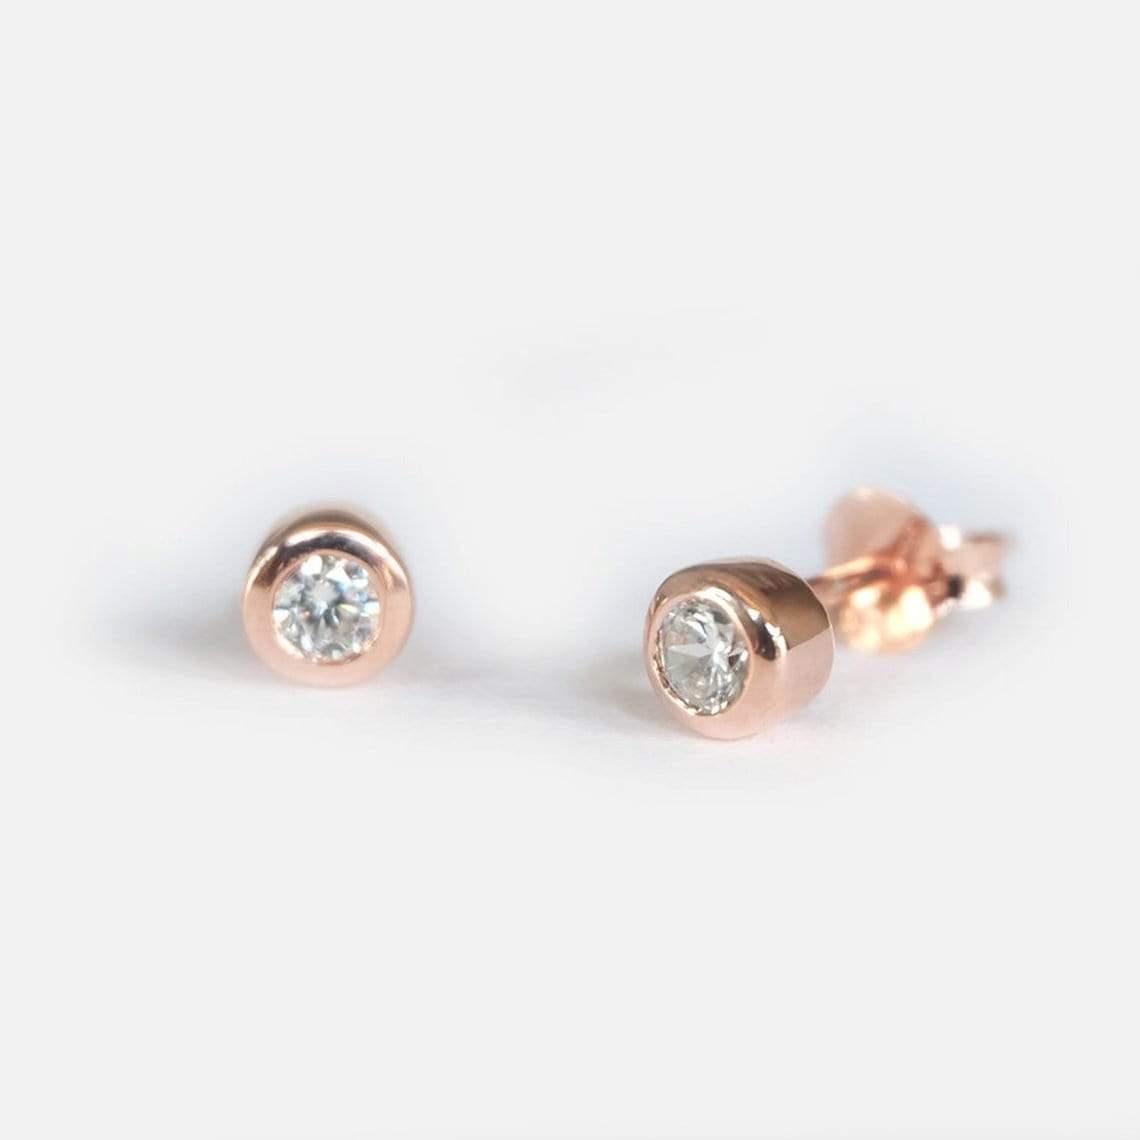 0.10 Carats 14k Solid Rose Gold Diamond Earrings - SOVATS